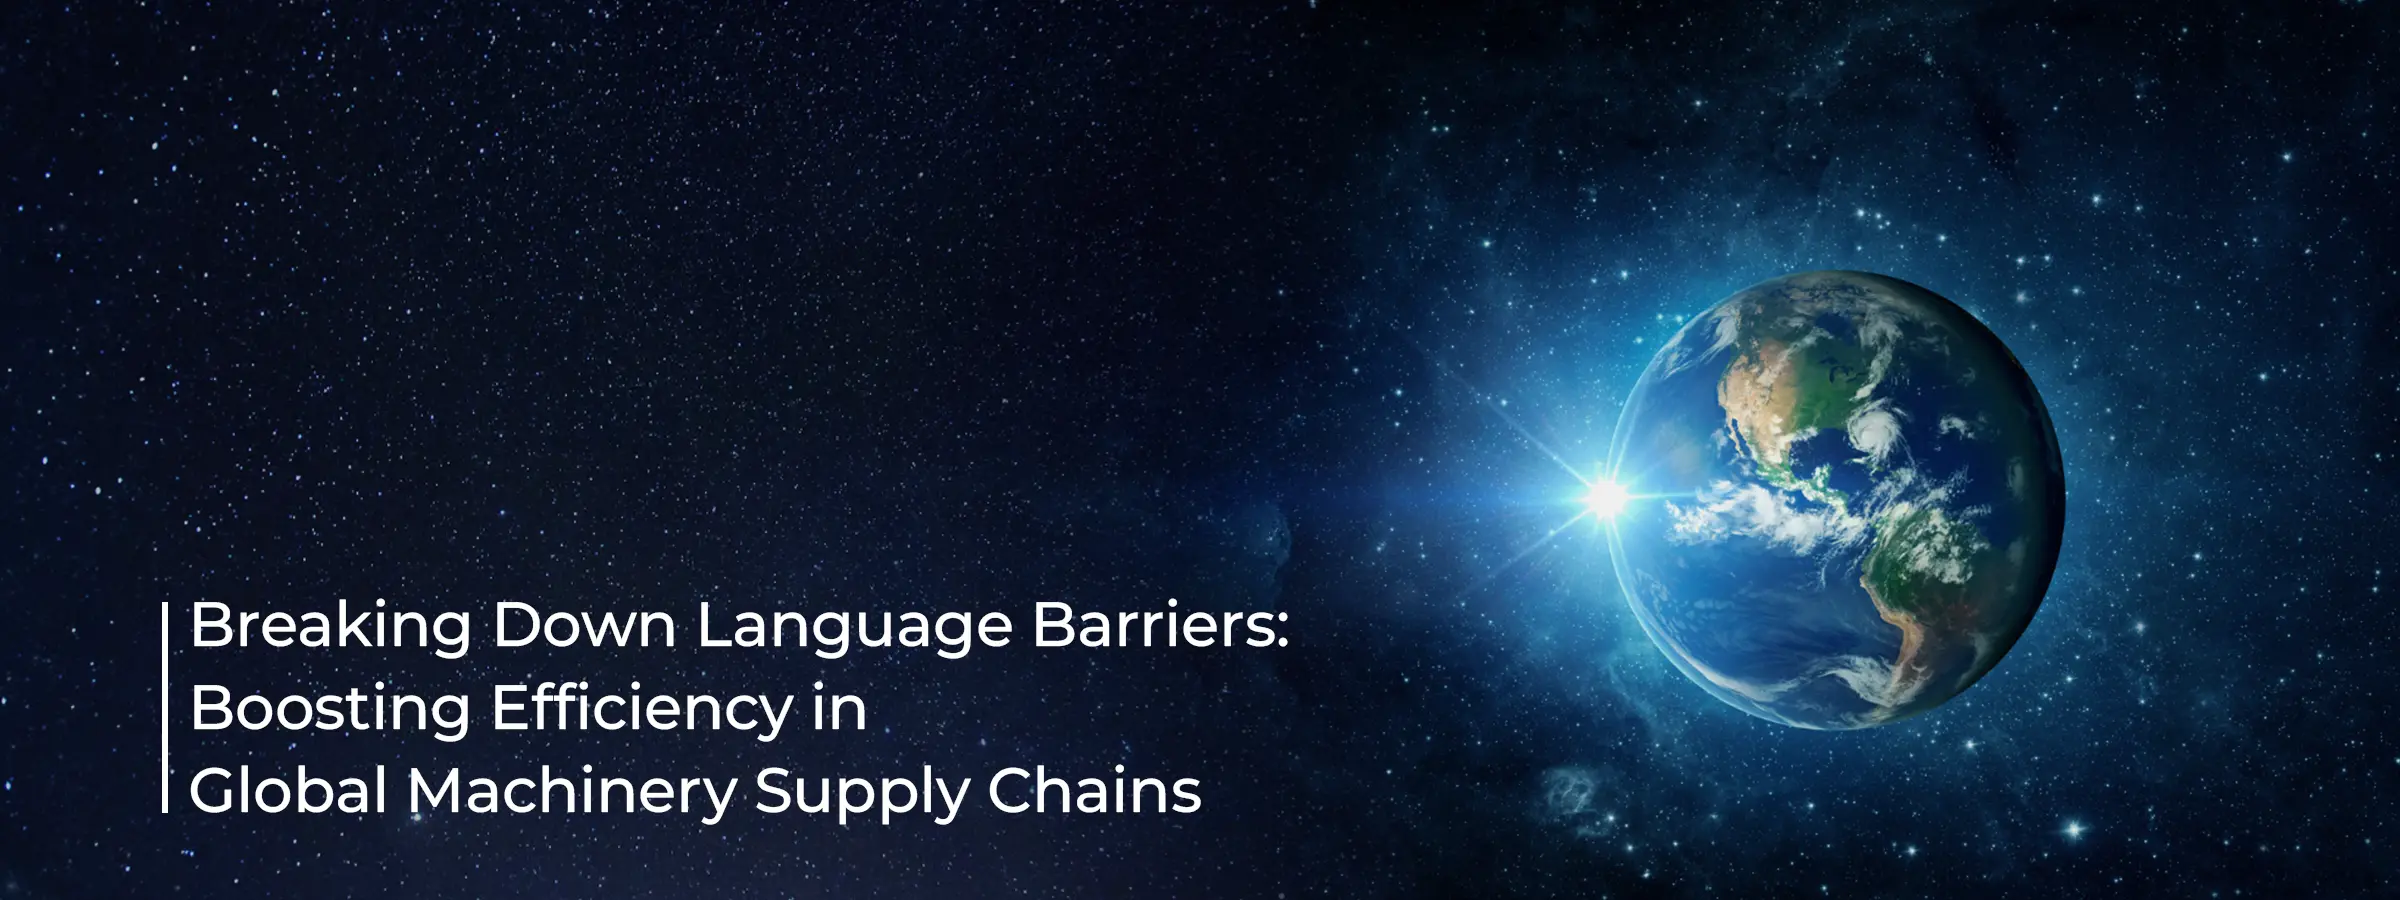 breaking-down-language-barriers-boosting-efficiency-in-global-machinery-supply-chains